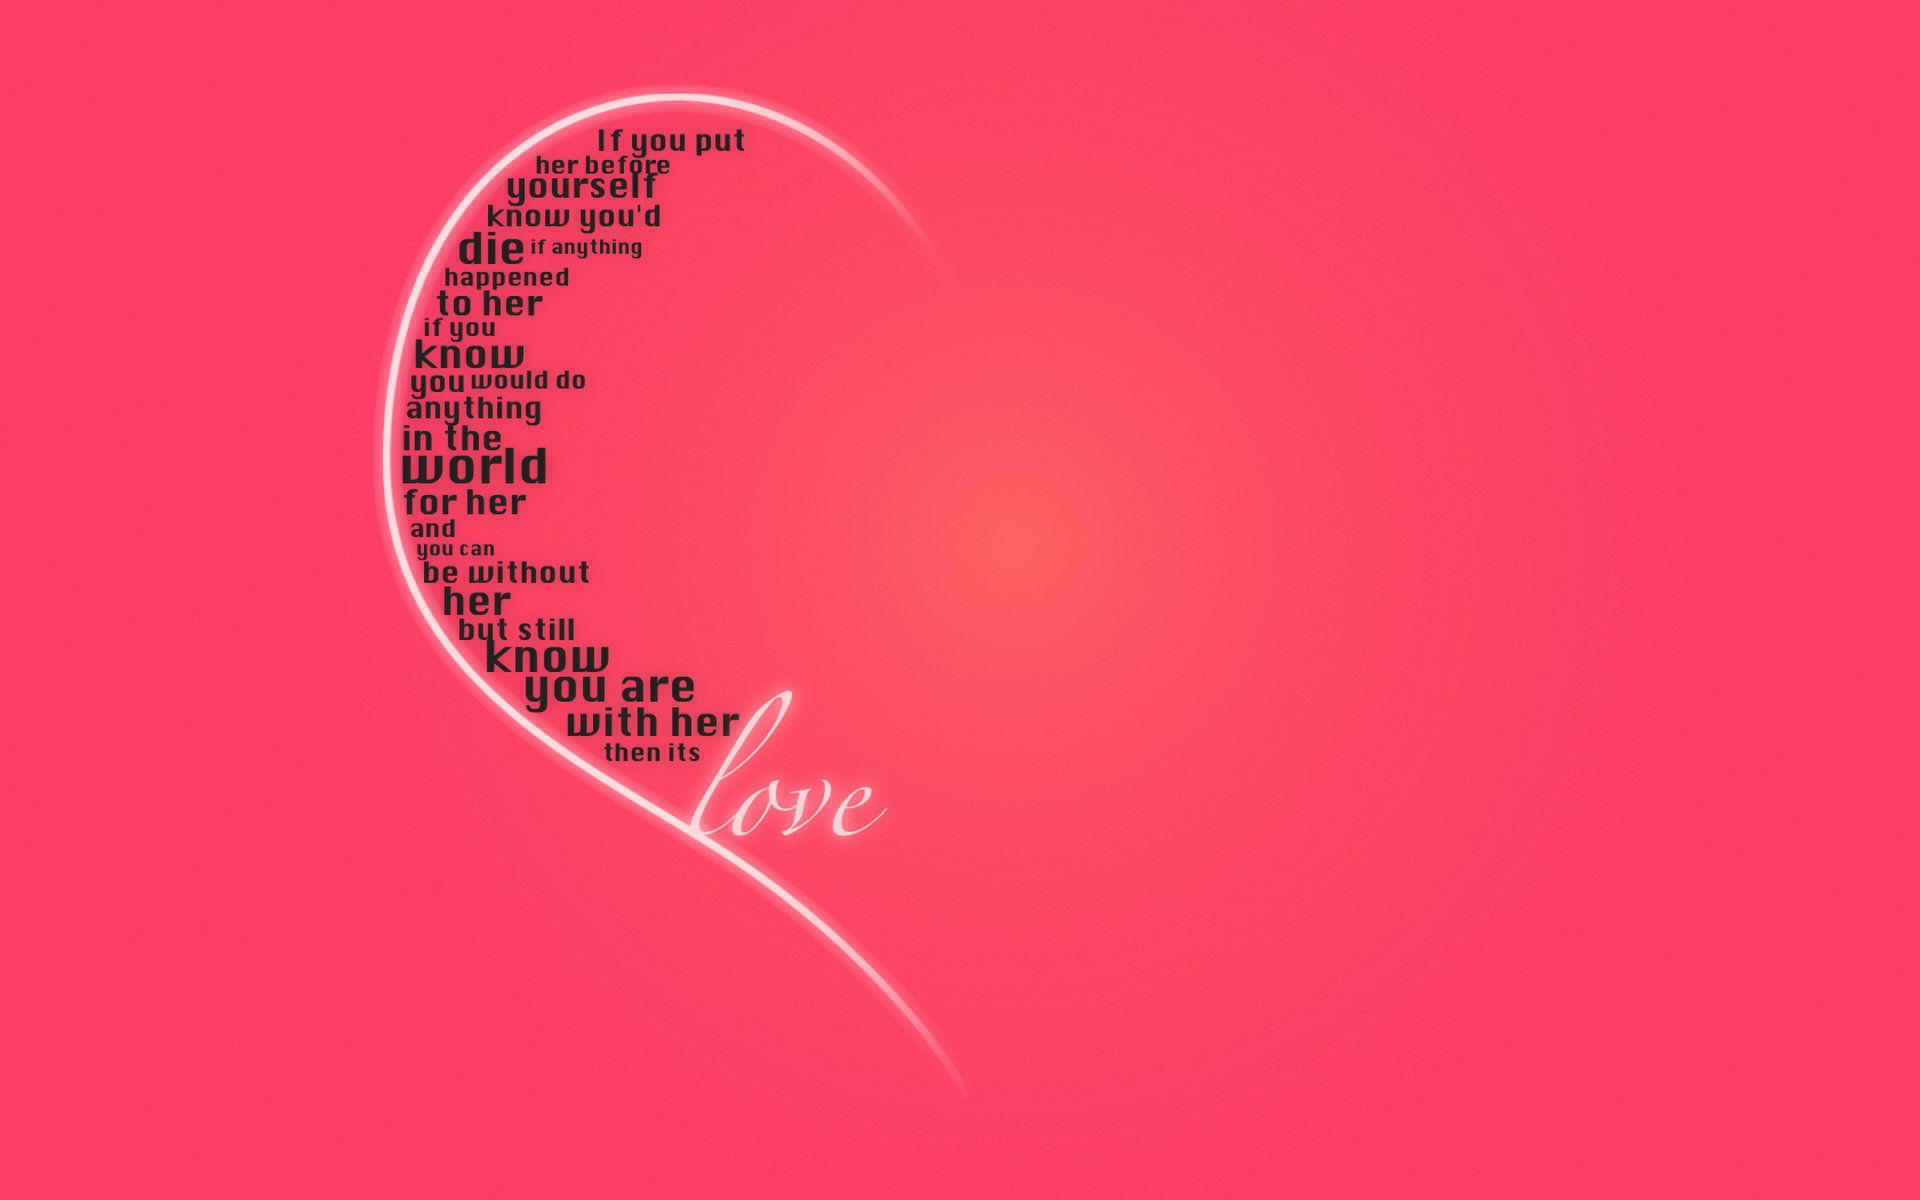 Love Valentine Quotes Wallpaper Images #13174 Wallpaper | High ...